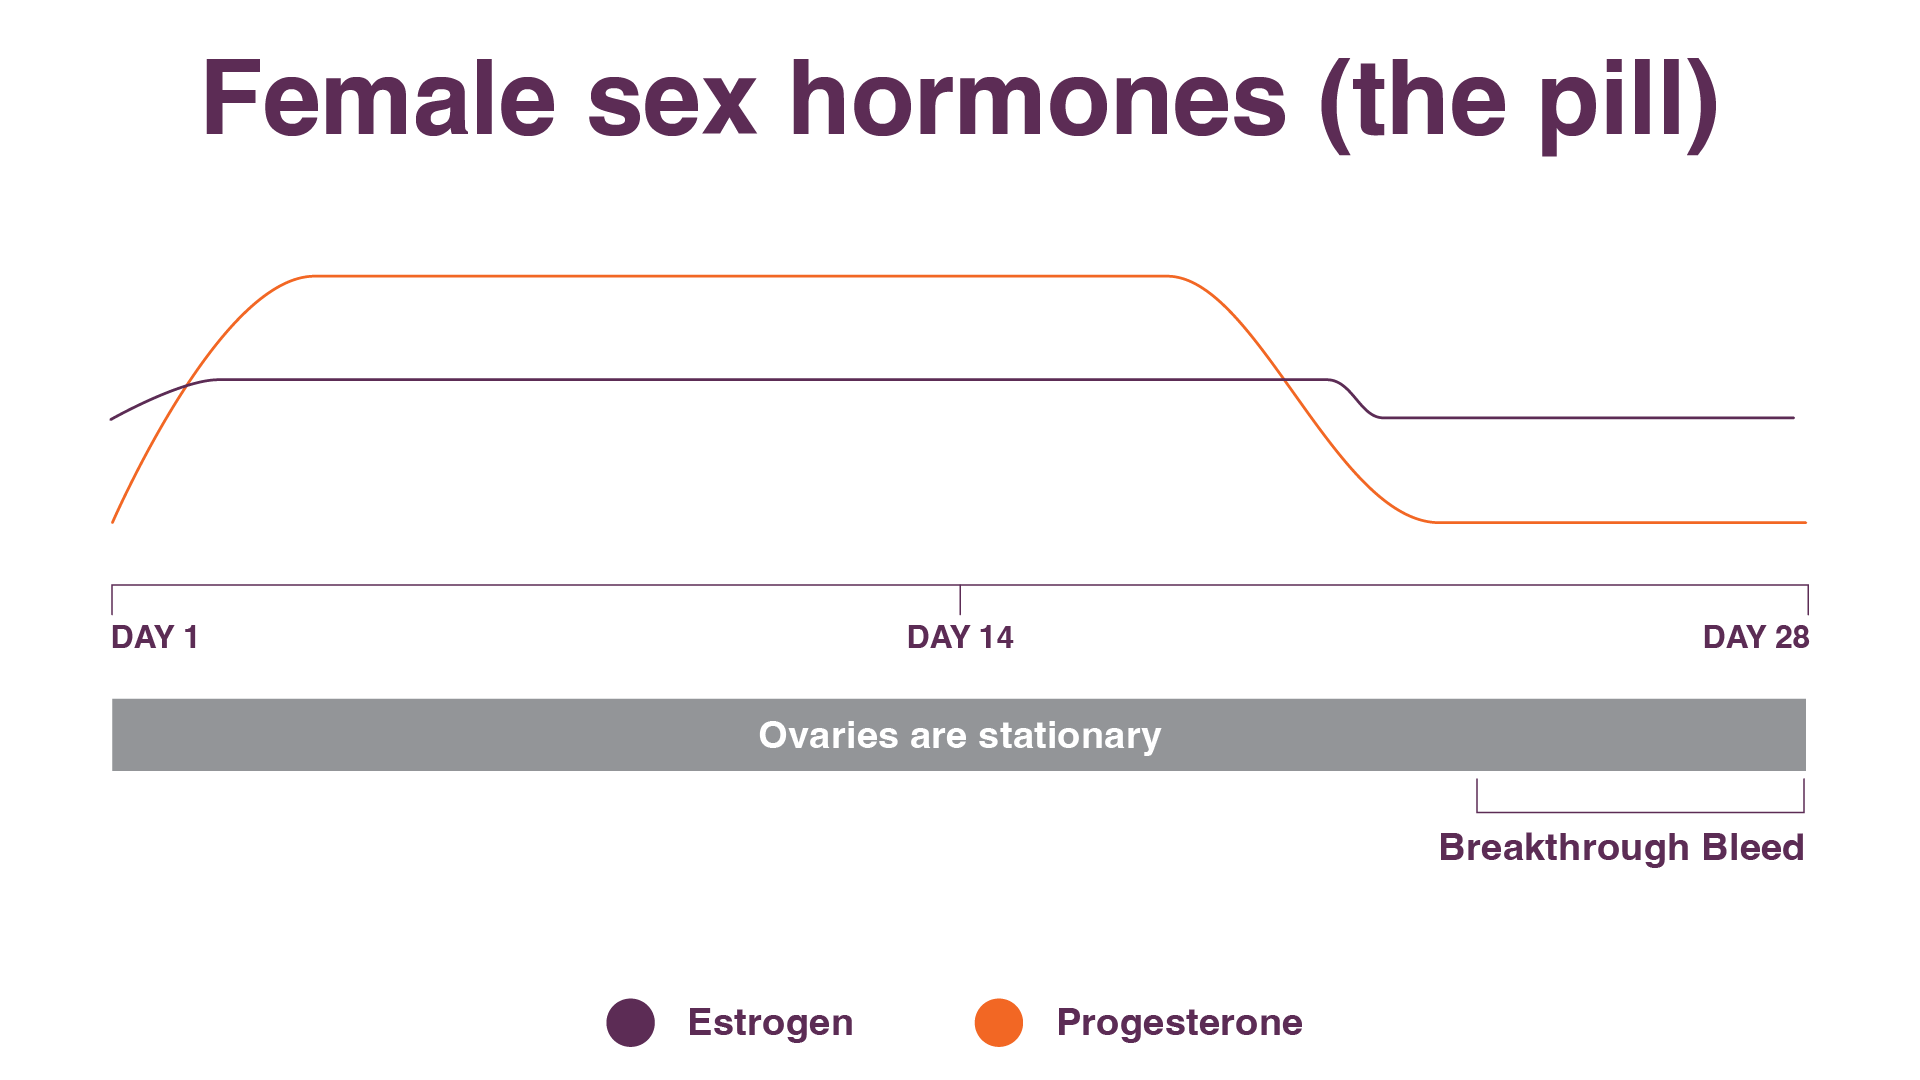 seed-cycling-seed-cycl-blend-hormones-on-the-pill-graph